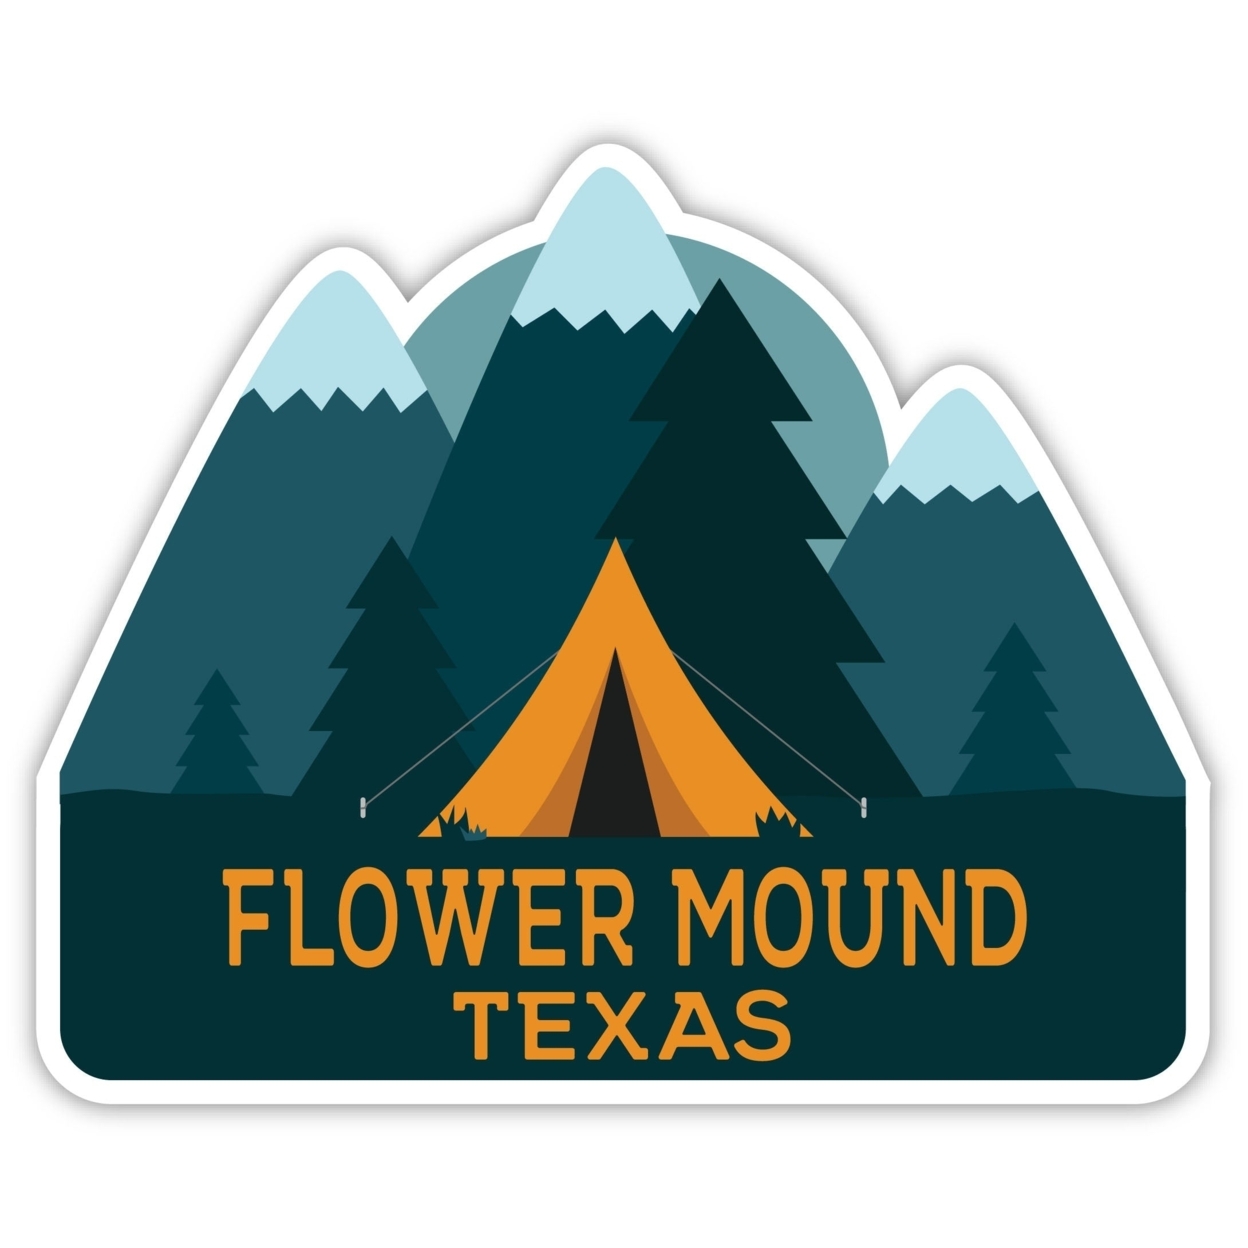 Flower Mound Texas Souvenir Decorative Stickers (Choose Theme And Size) - 4-Pack, 12-Inch, Tent